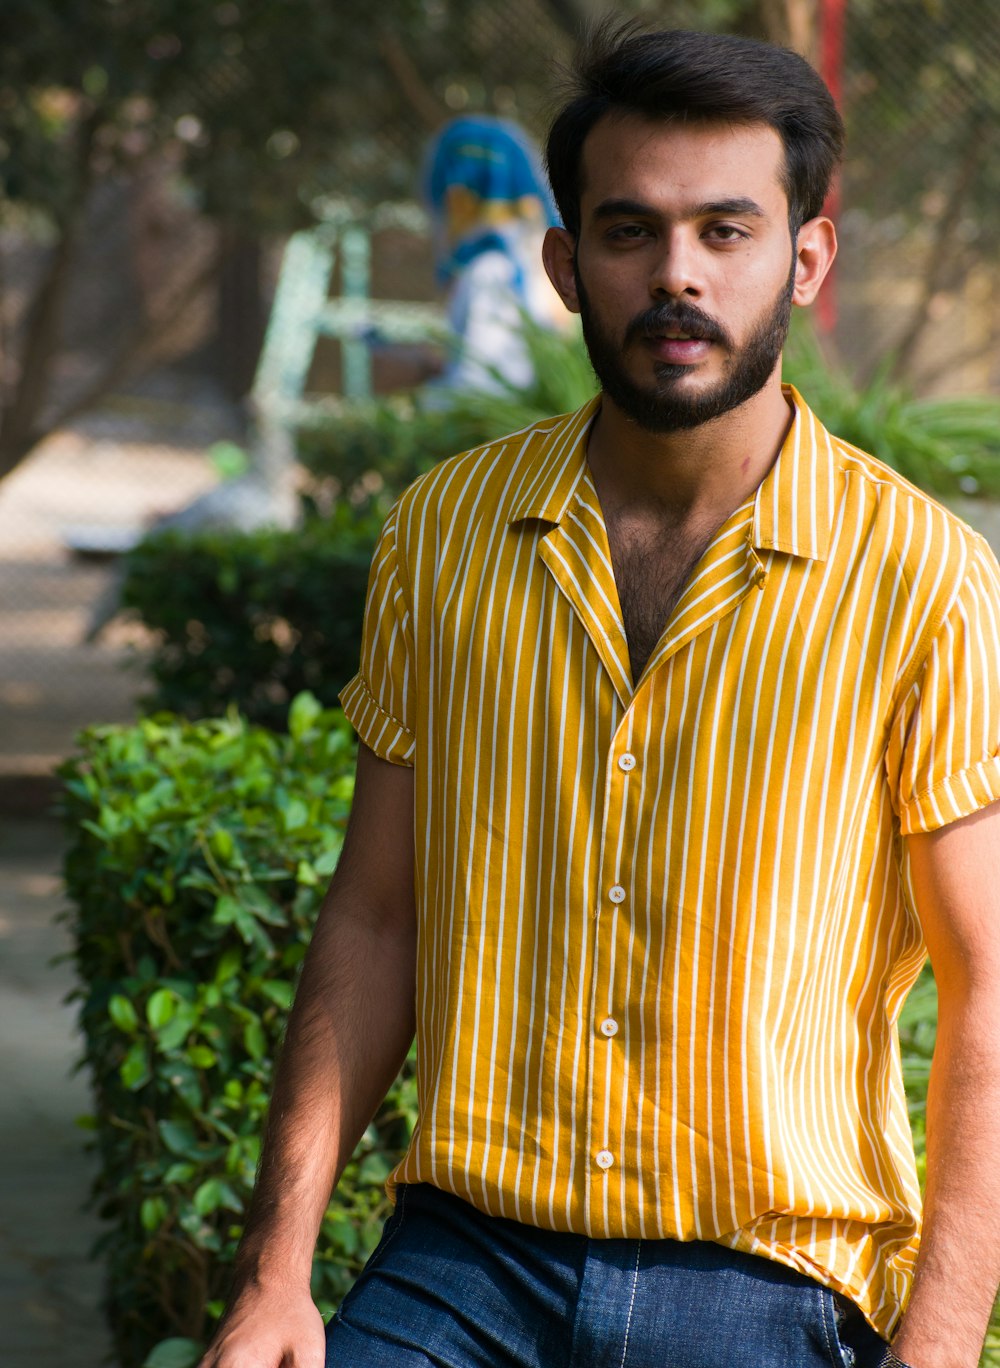 man in yellow and white striped button up shirt standing near green plants during daytime